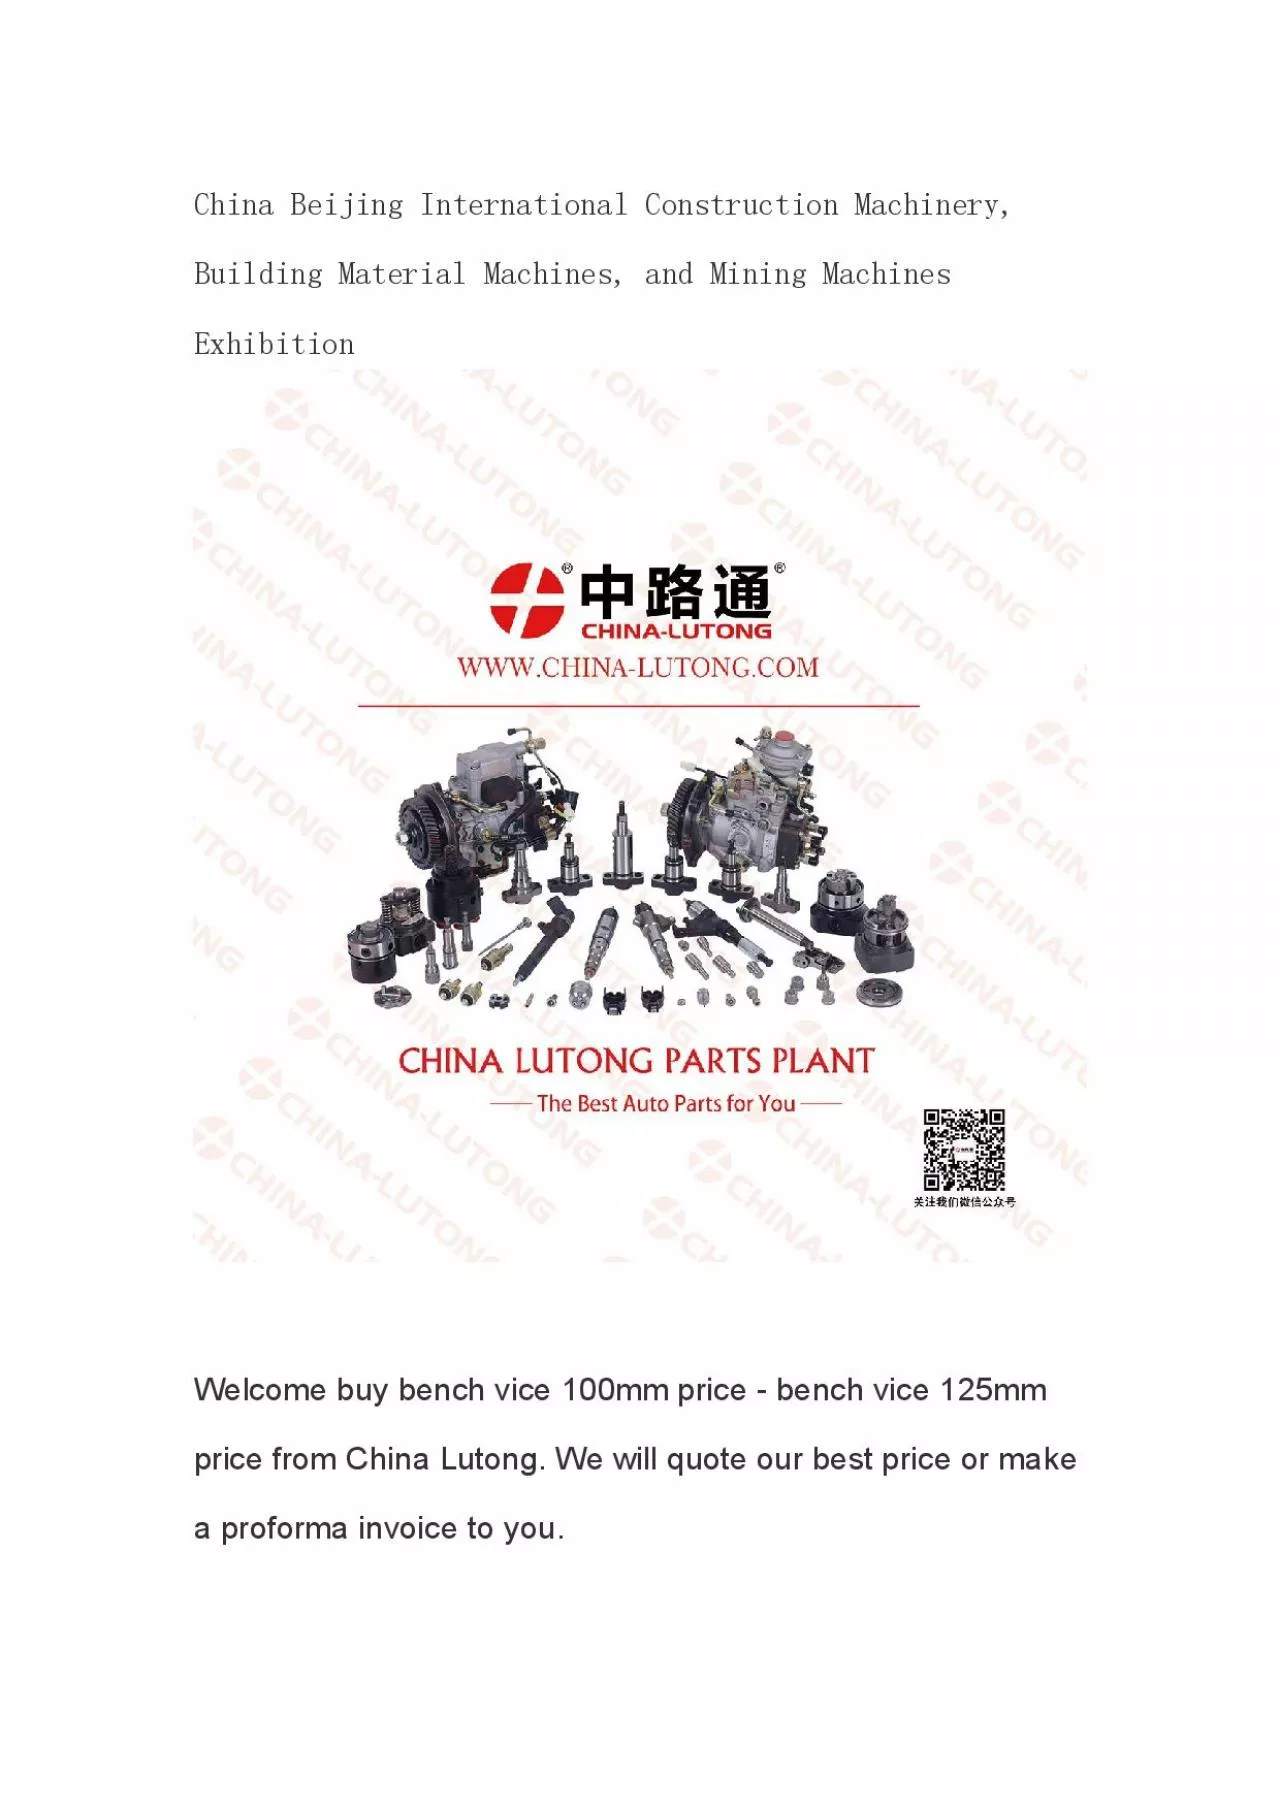 China Beijing International Construction Machinery, Building Material Machines, and Mining